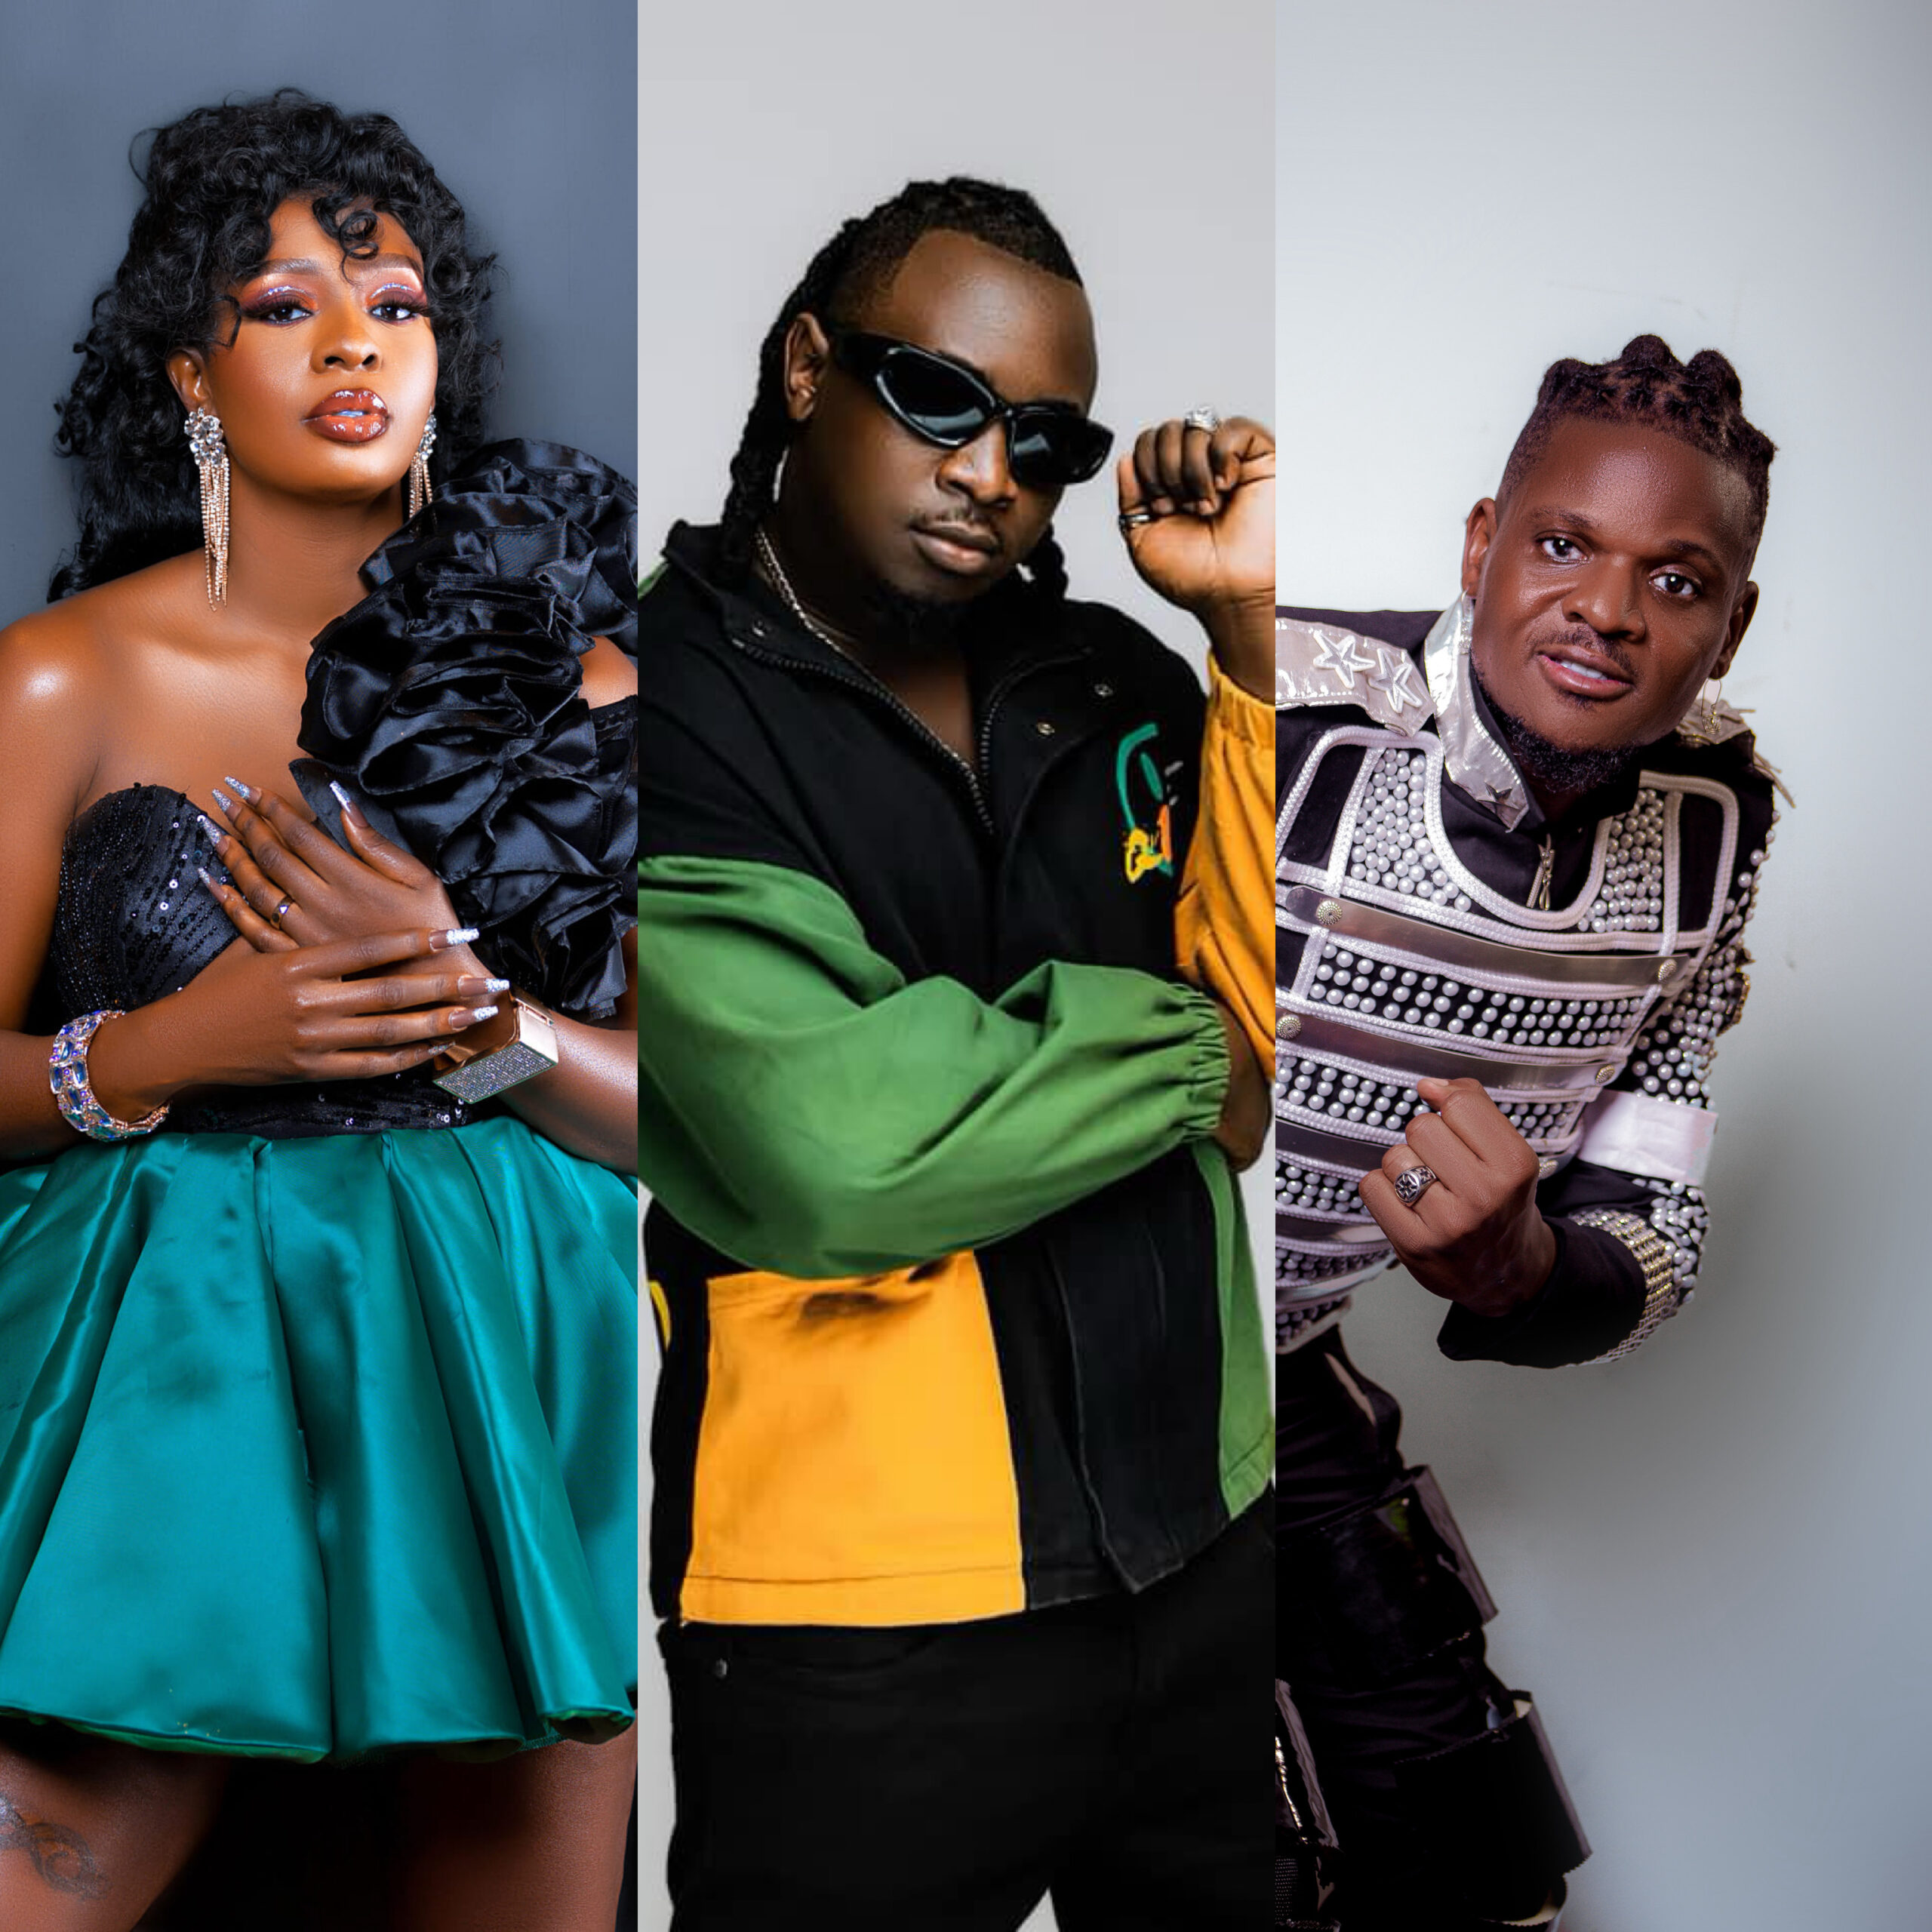 Cindy, King Micheal, Vyper Ranking, Abeeka Band & Double Black Set to Ignite Roast and Rhyme this Sunday